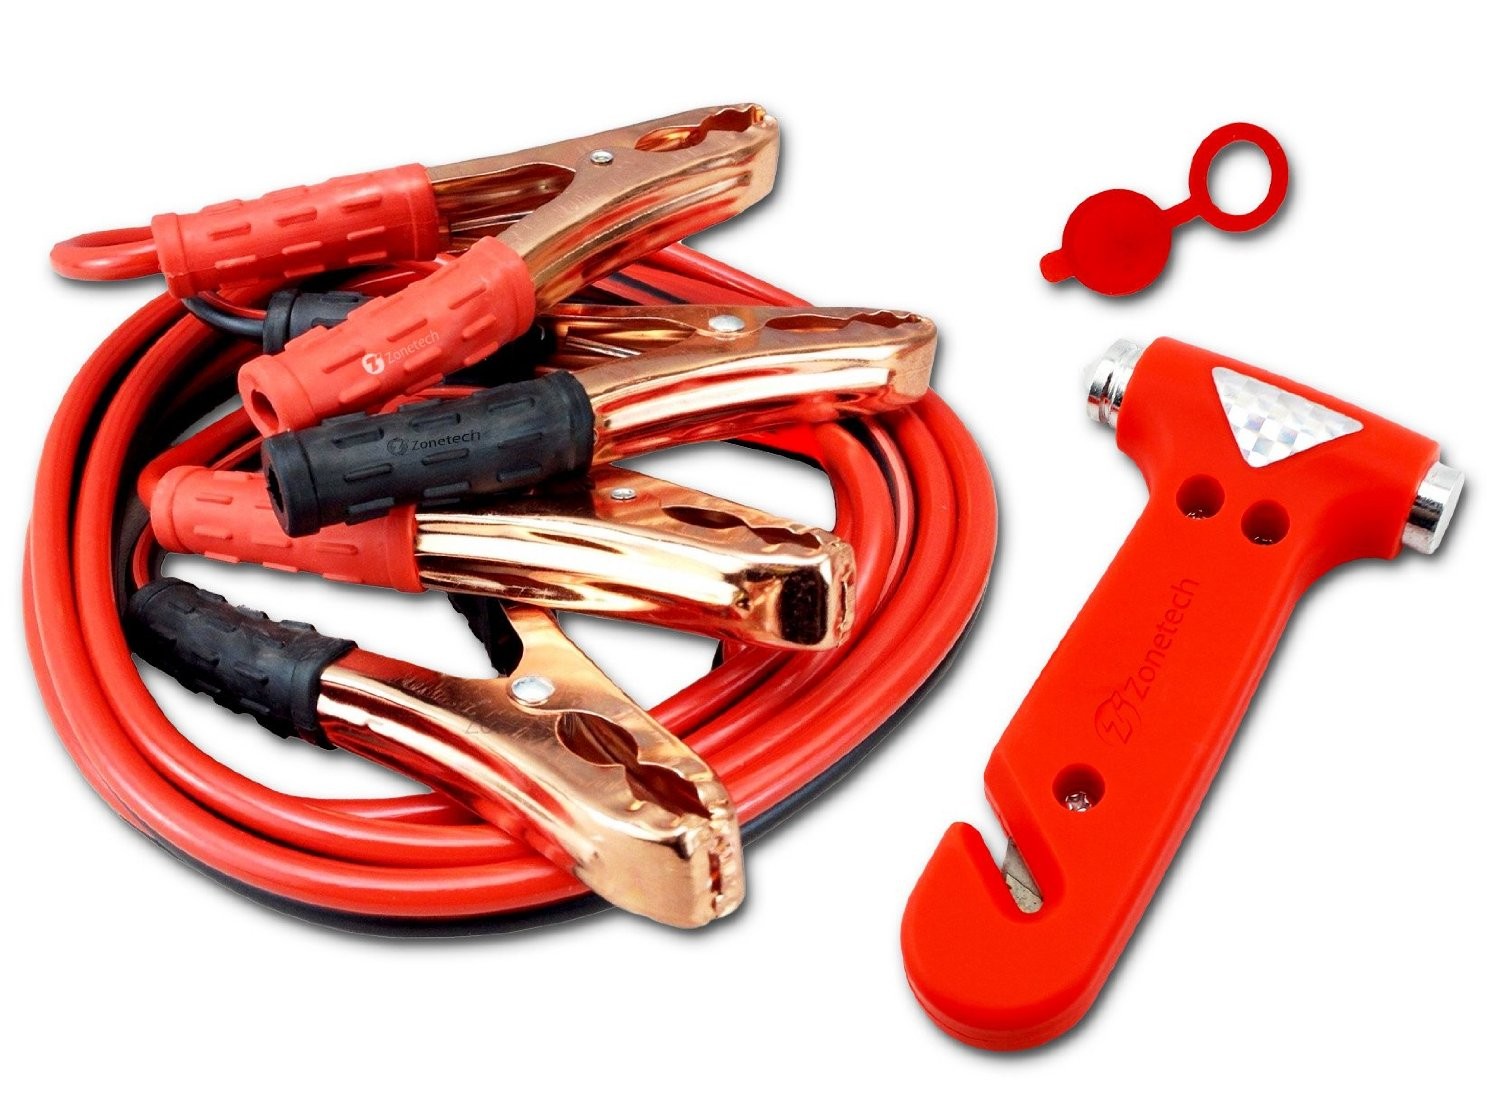 Emergency Combo 200 AMP 12 Ft Booster Cables+ Life Hammer Escape Tool